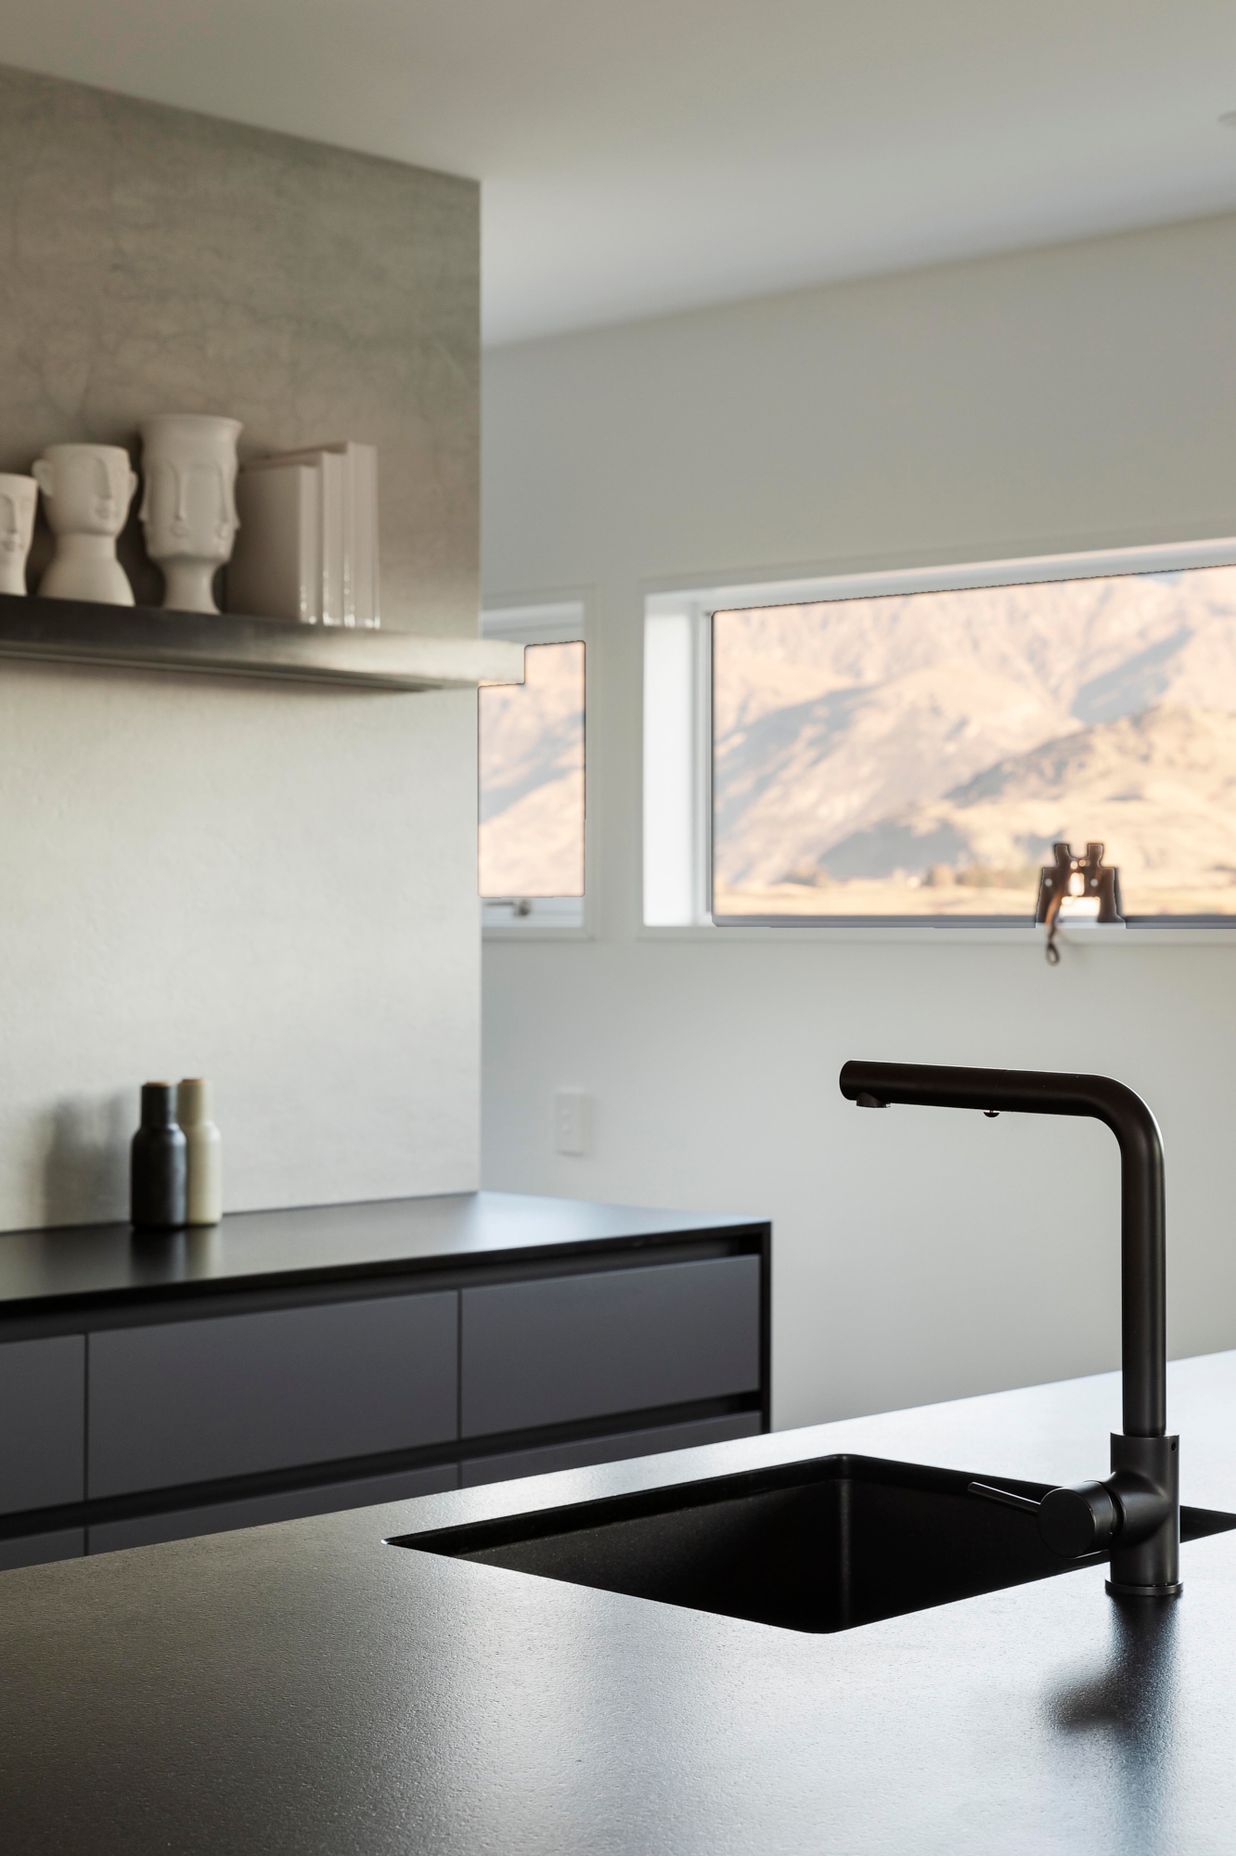 A slot window that runs along the kitchen wall at head height, captures The Remarkables perfectly.